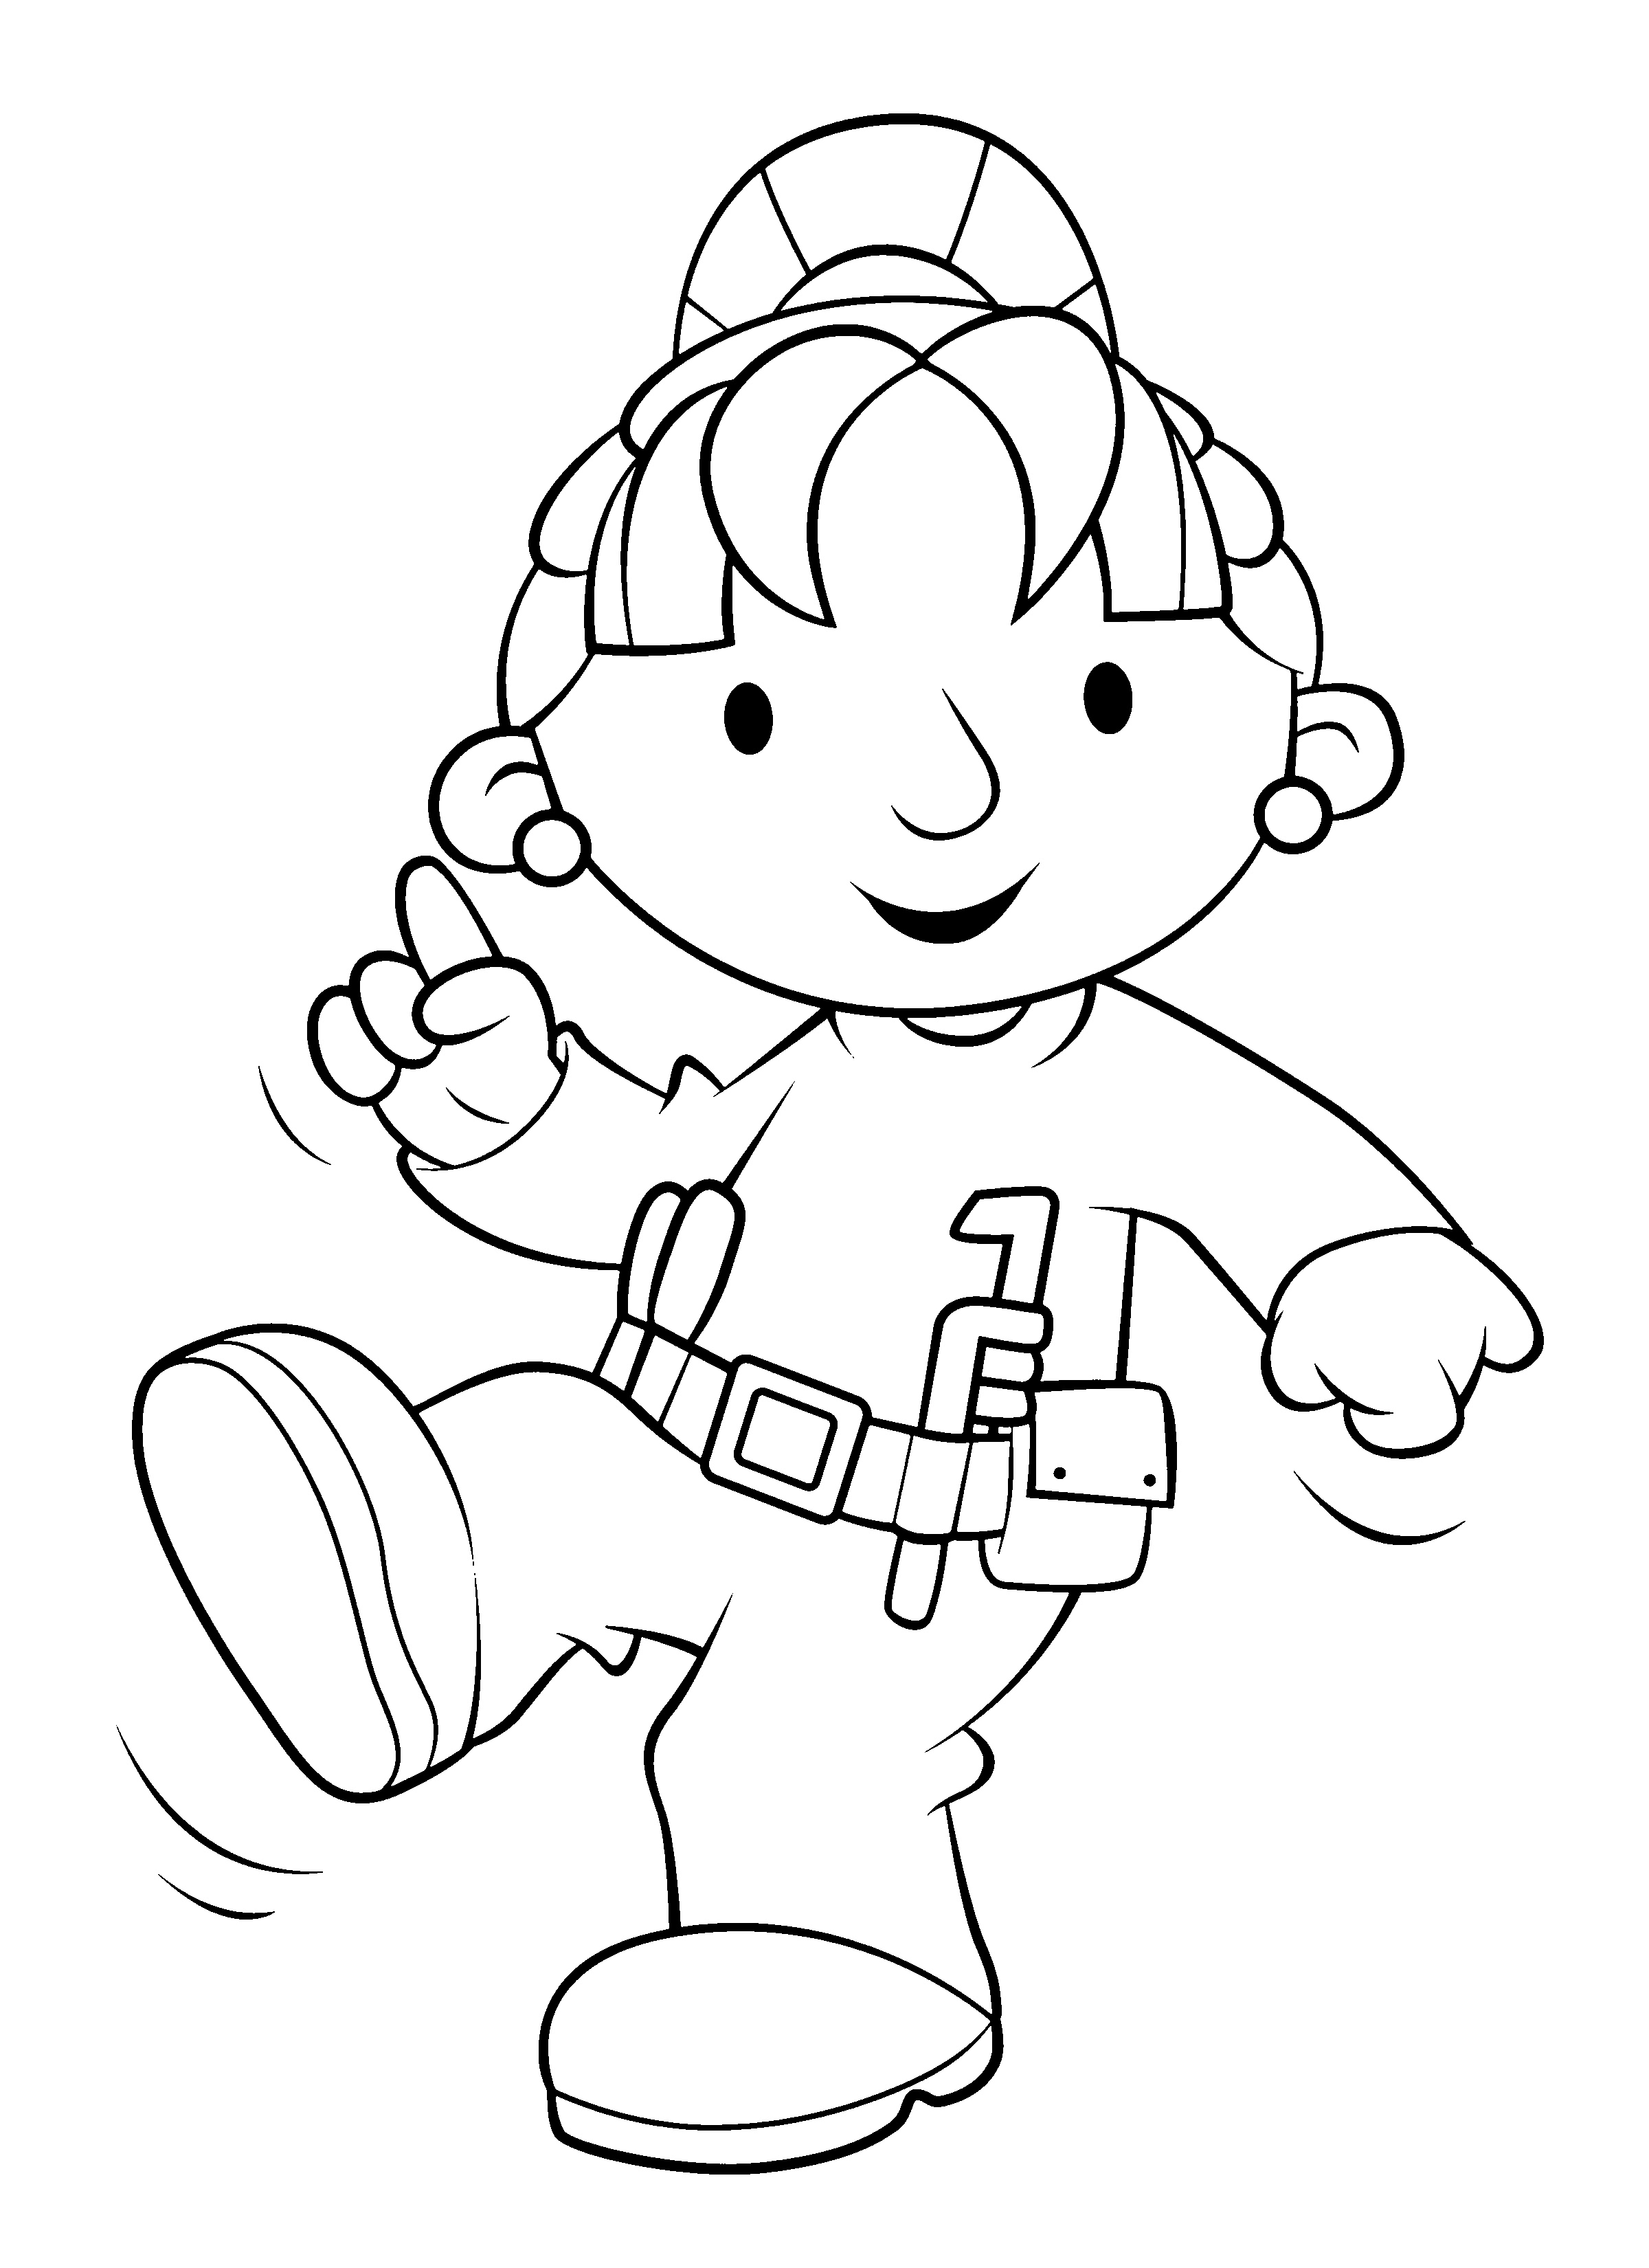 Bob the Builder Coloring Page - Free Printable Pages for Young Fans